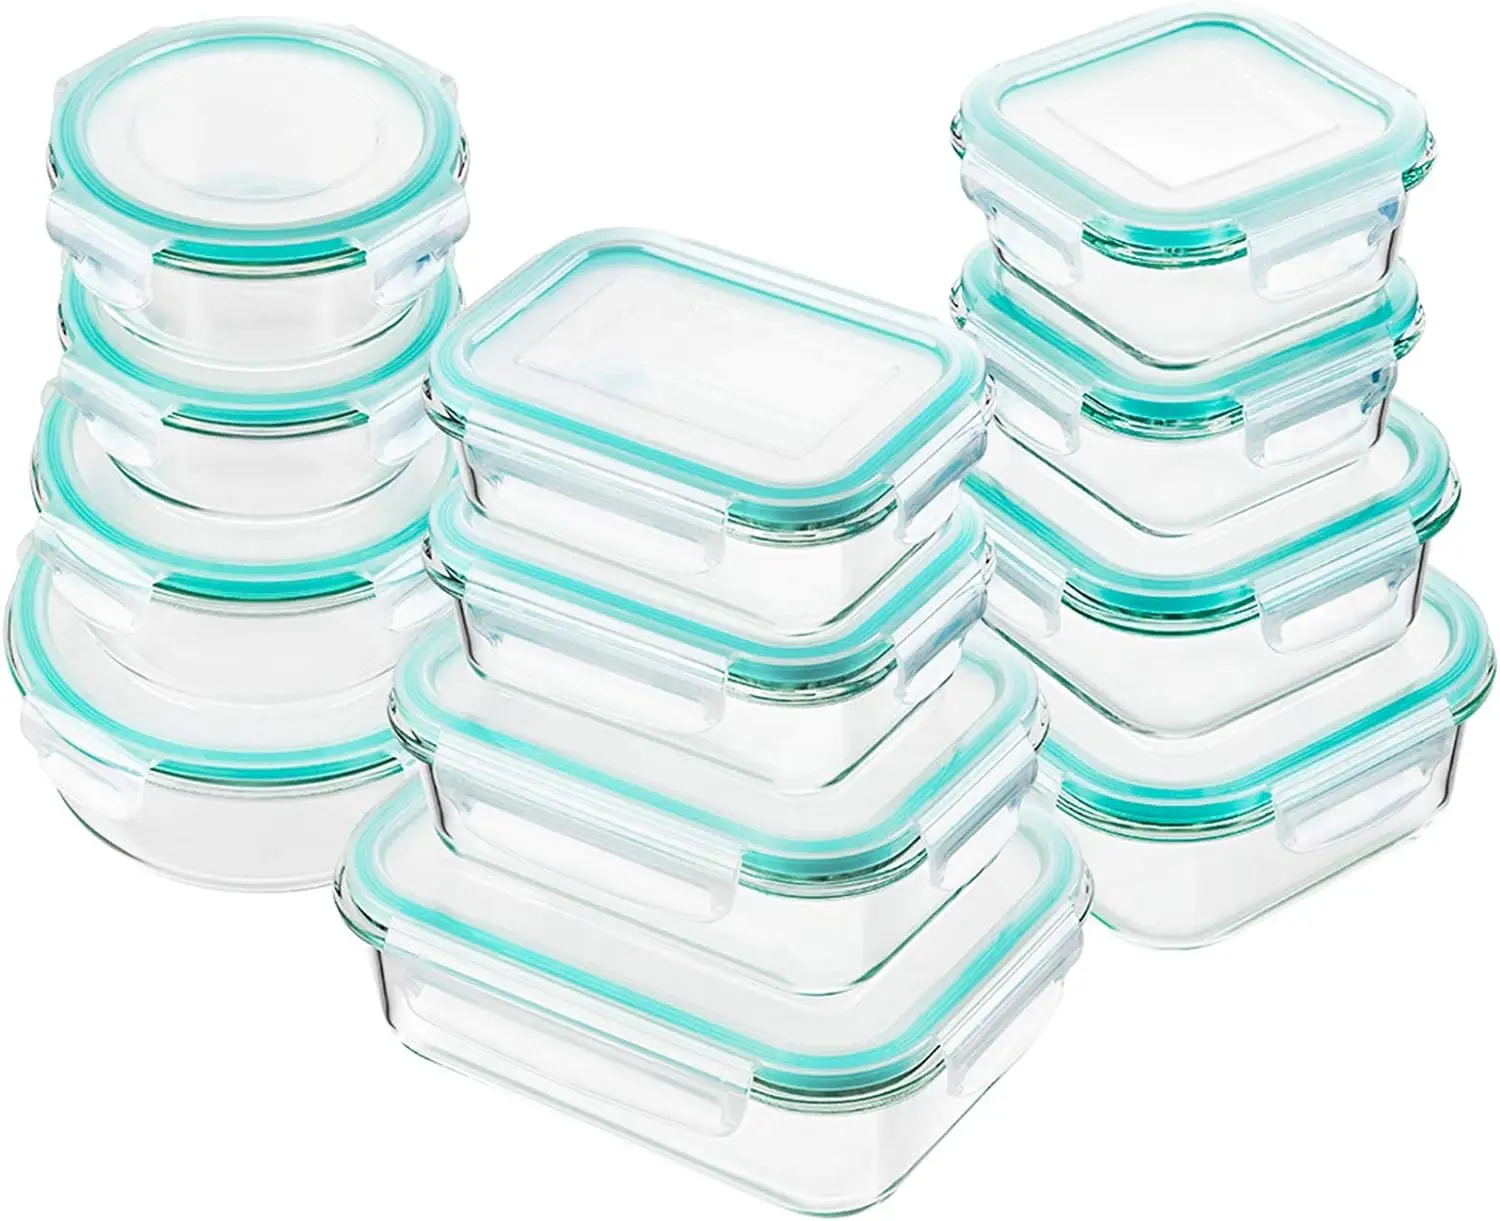 

Glass Food Storage Containers with Lids, [24 Piece] Meal Prep, Airtight Bento Boxes, BPA Free & Leak Proof